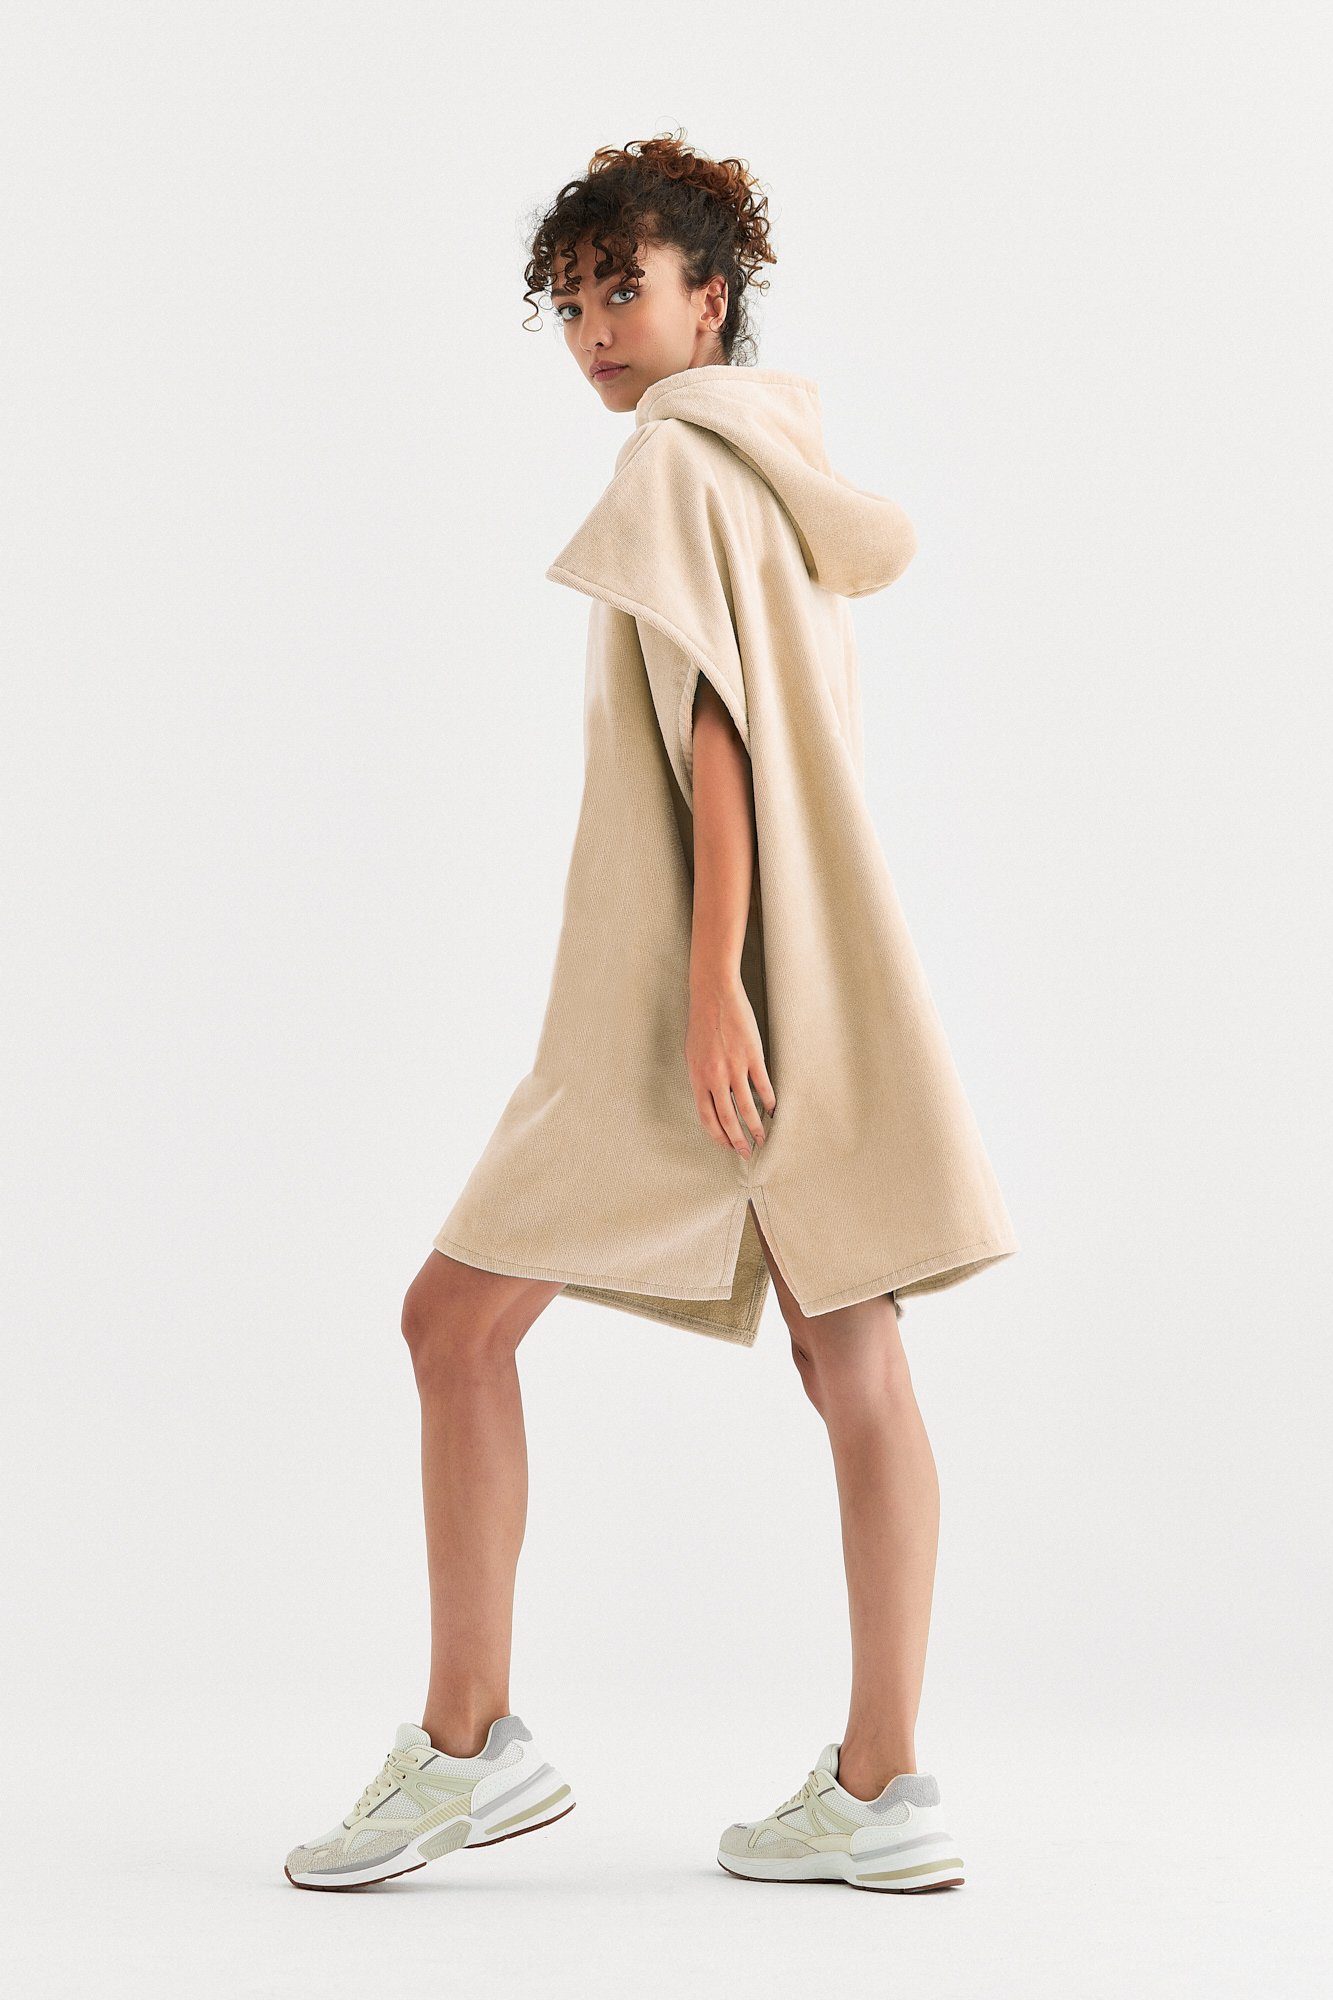 Rockupy Badeponcho Solo, Kapuze, aus Beige Frottee